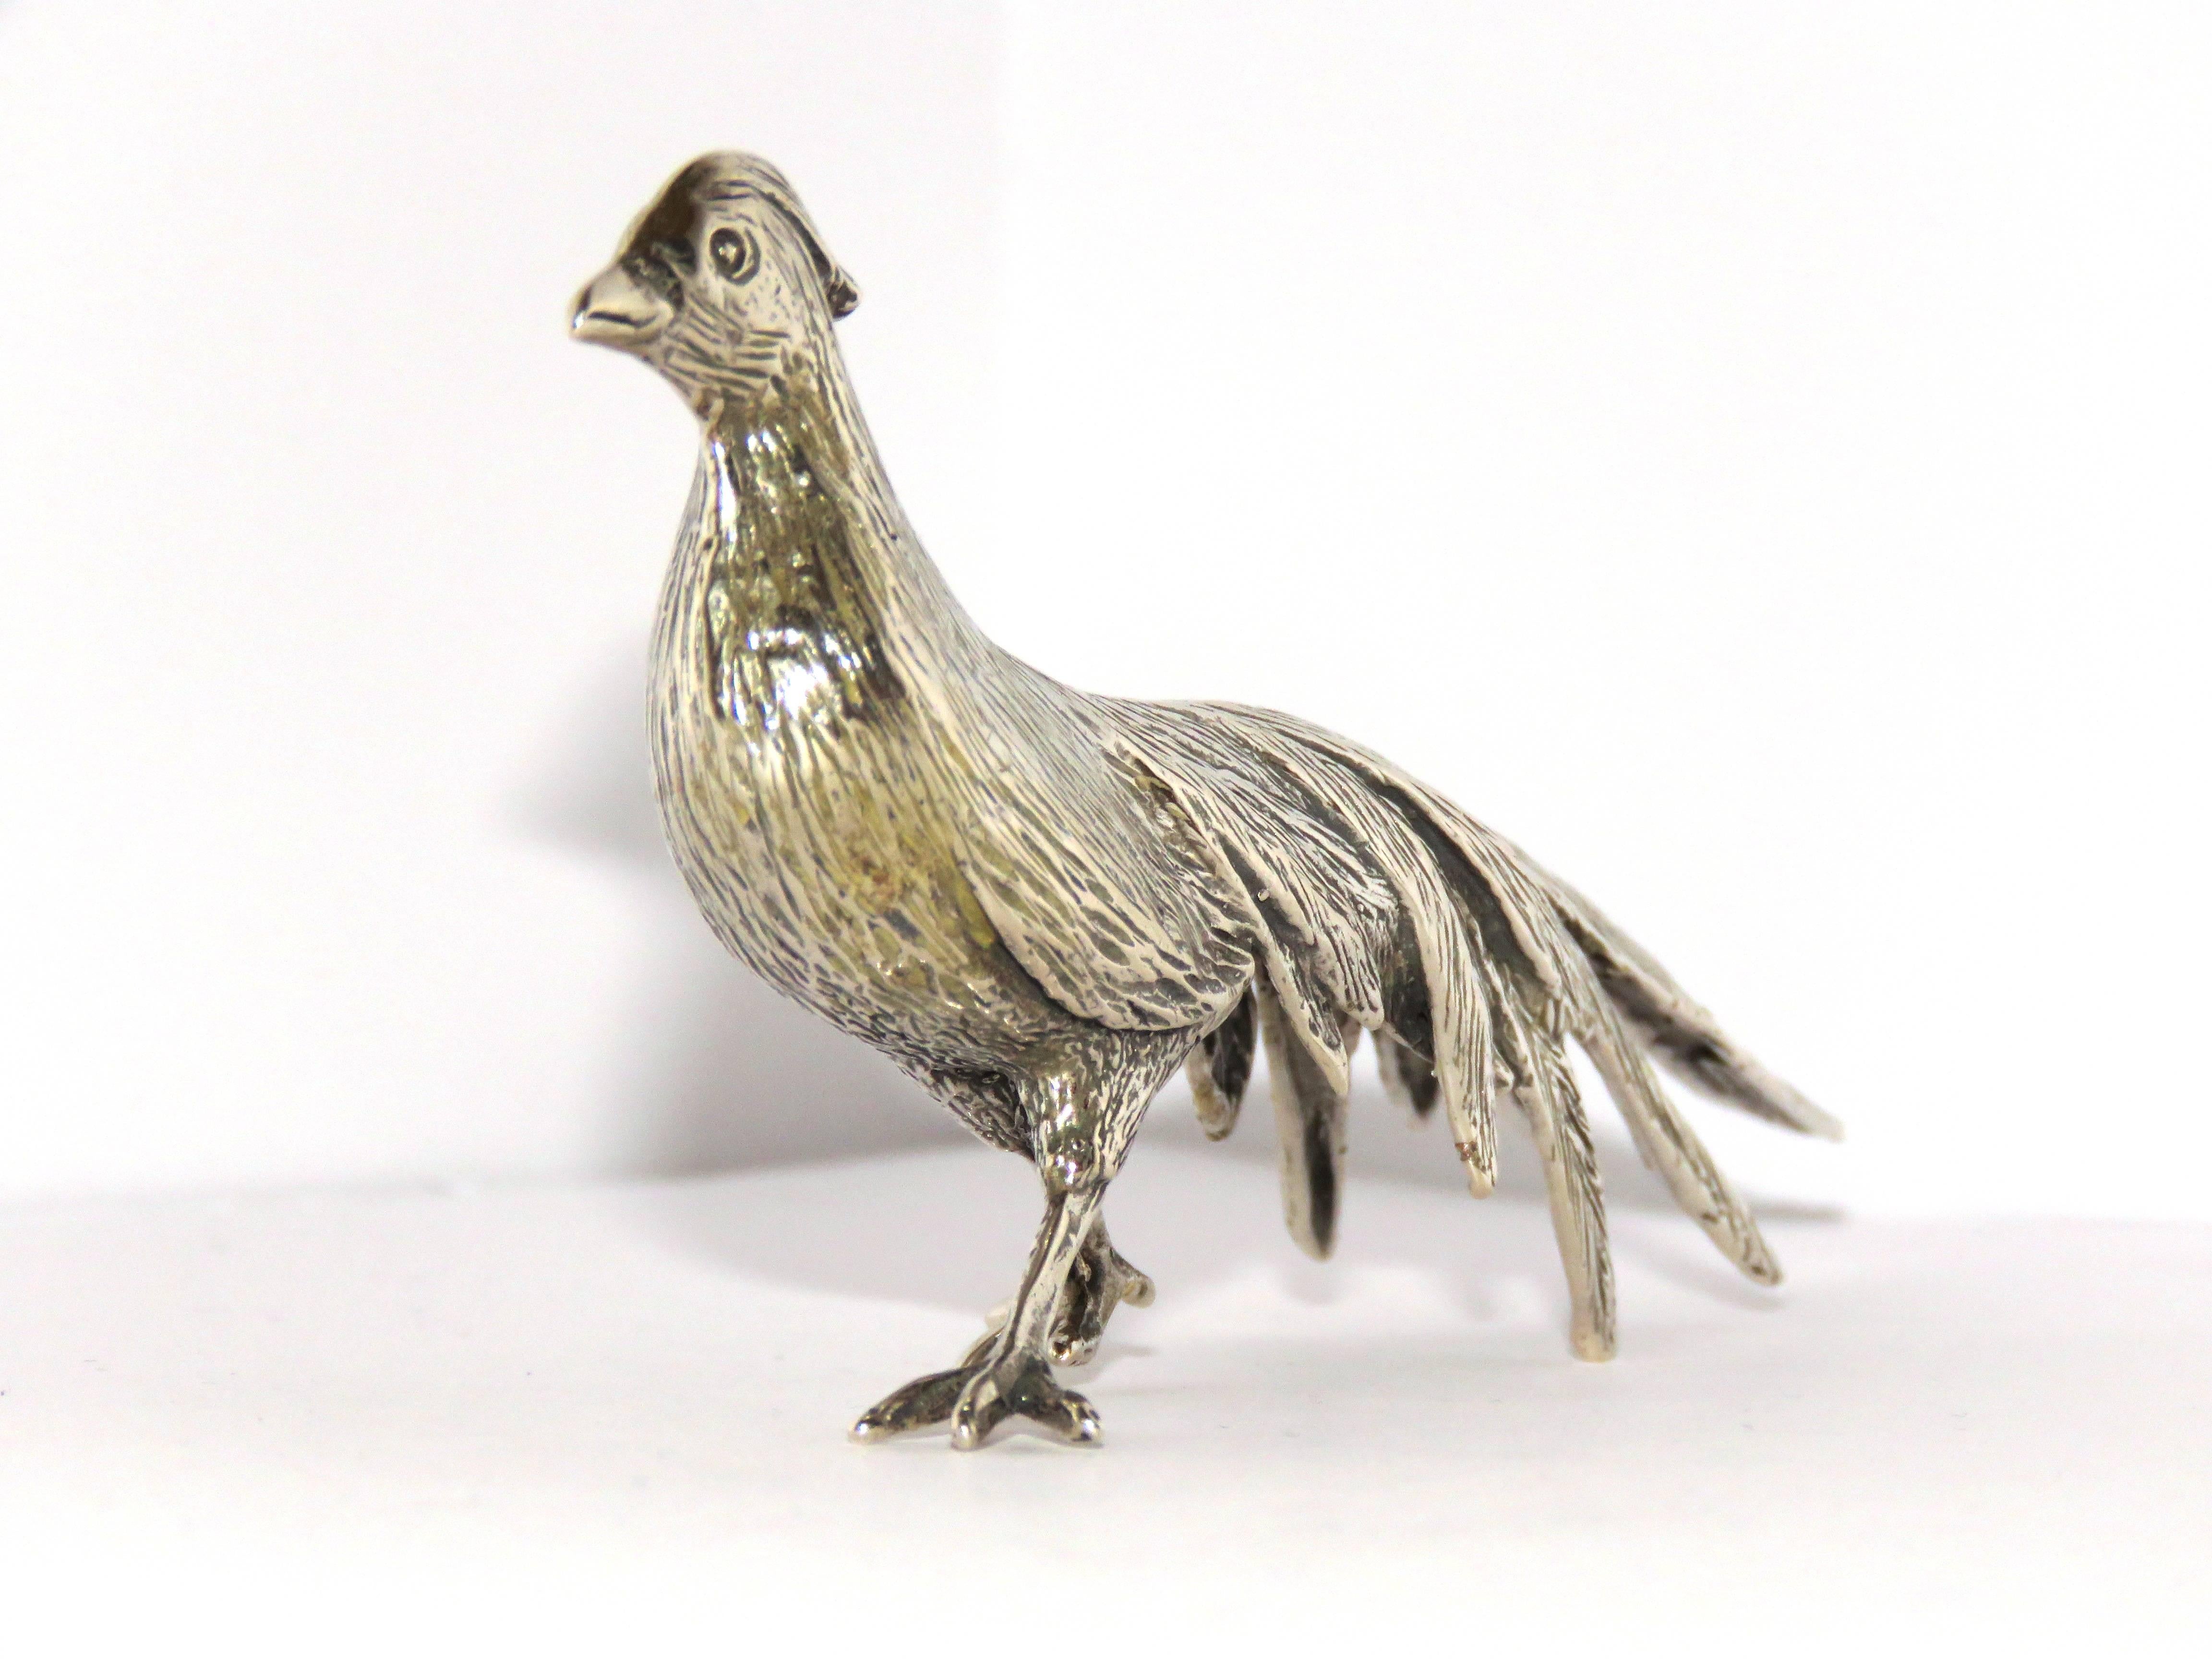 An exceptional fine and impressive vintage cast sterling silver model of a peacock.
This vintage silver peacock ornament has been embellished with details reproducing the Fine definition of the peacock's coat and anatomical features.
Dimensions: